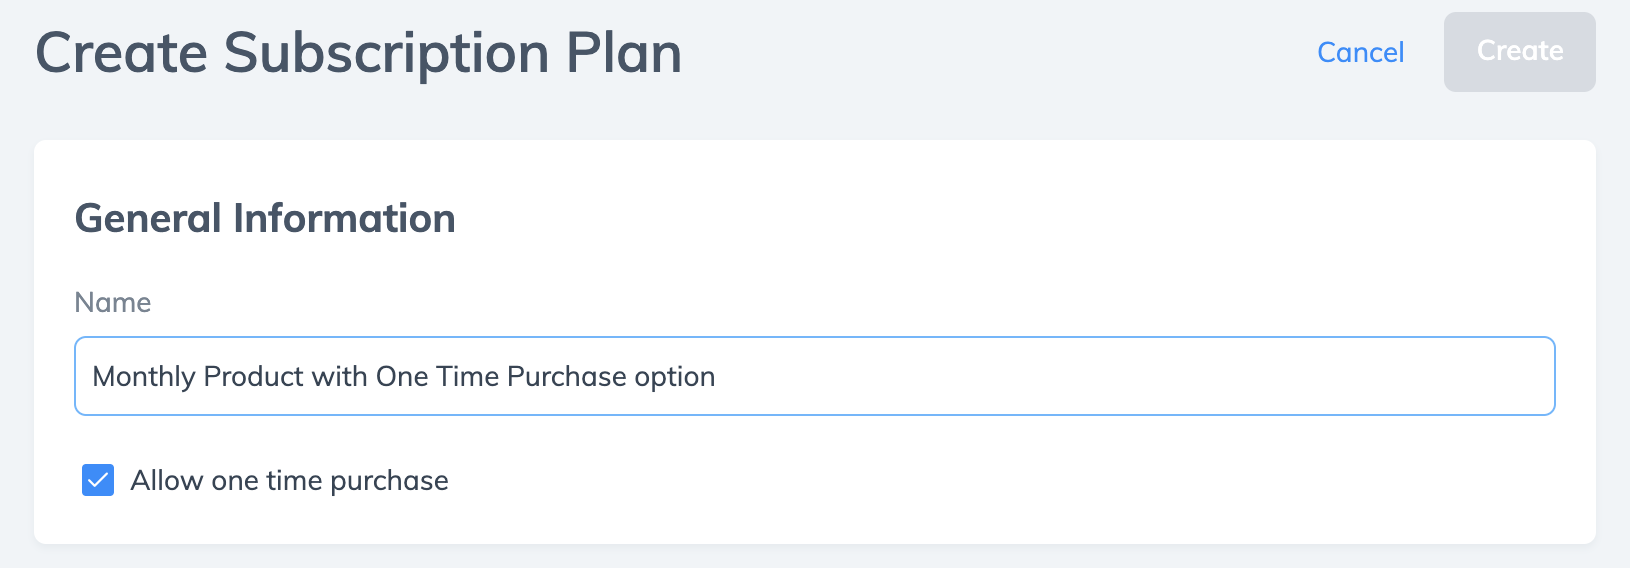 subscription-create-plan-general.png